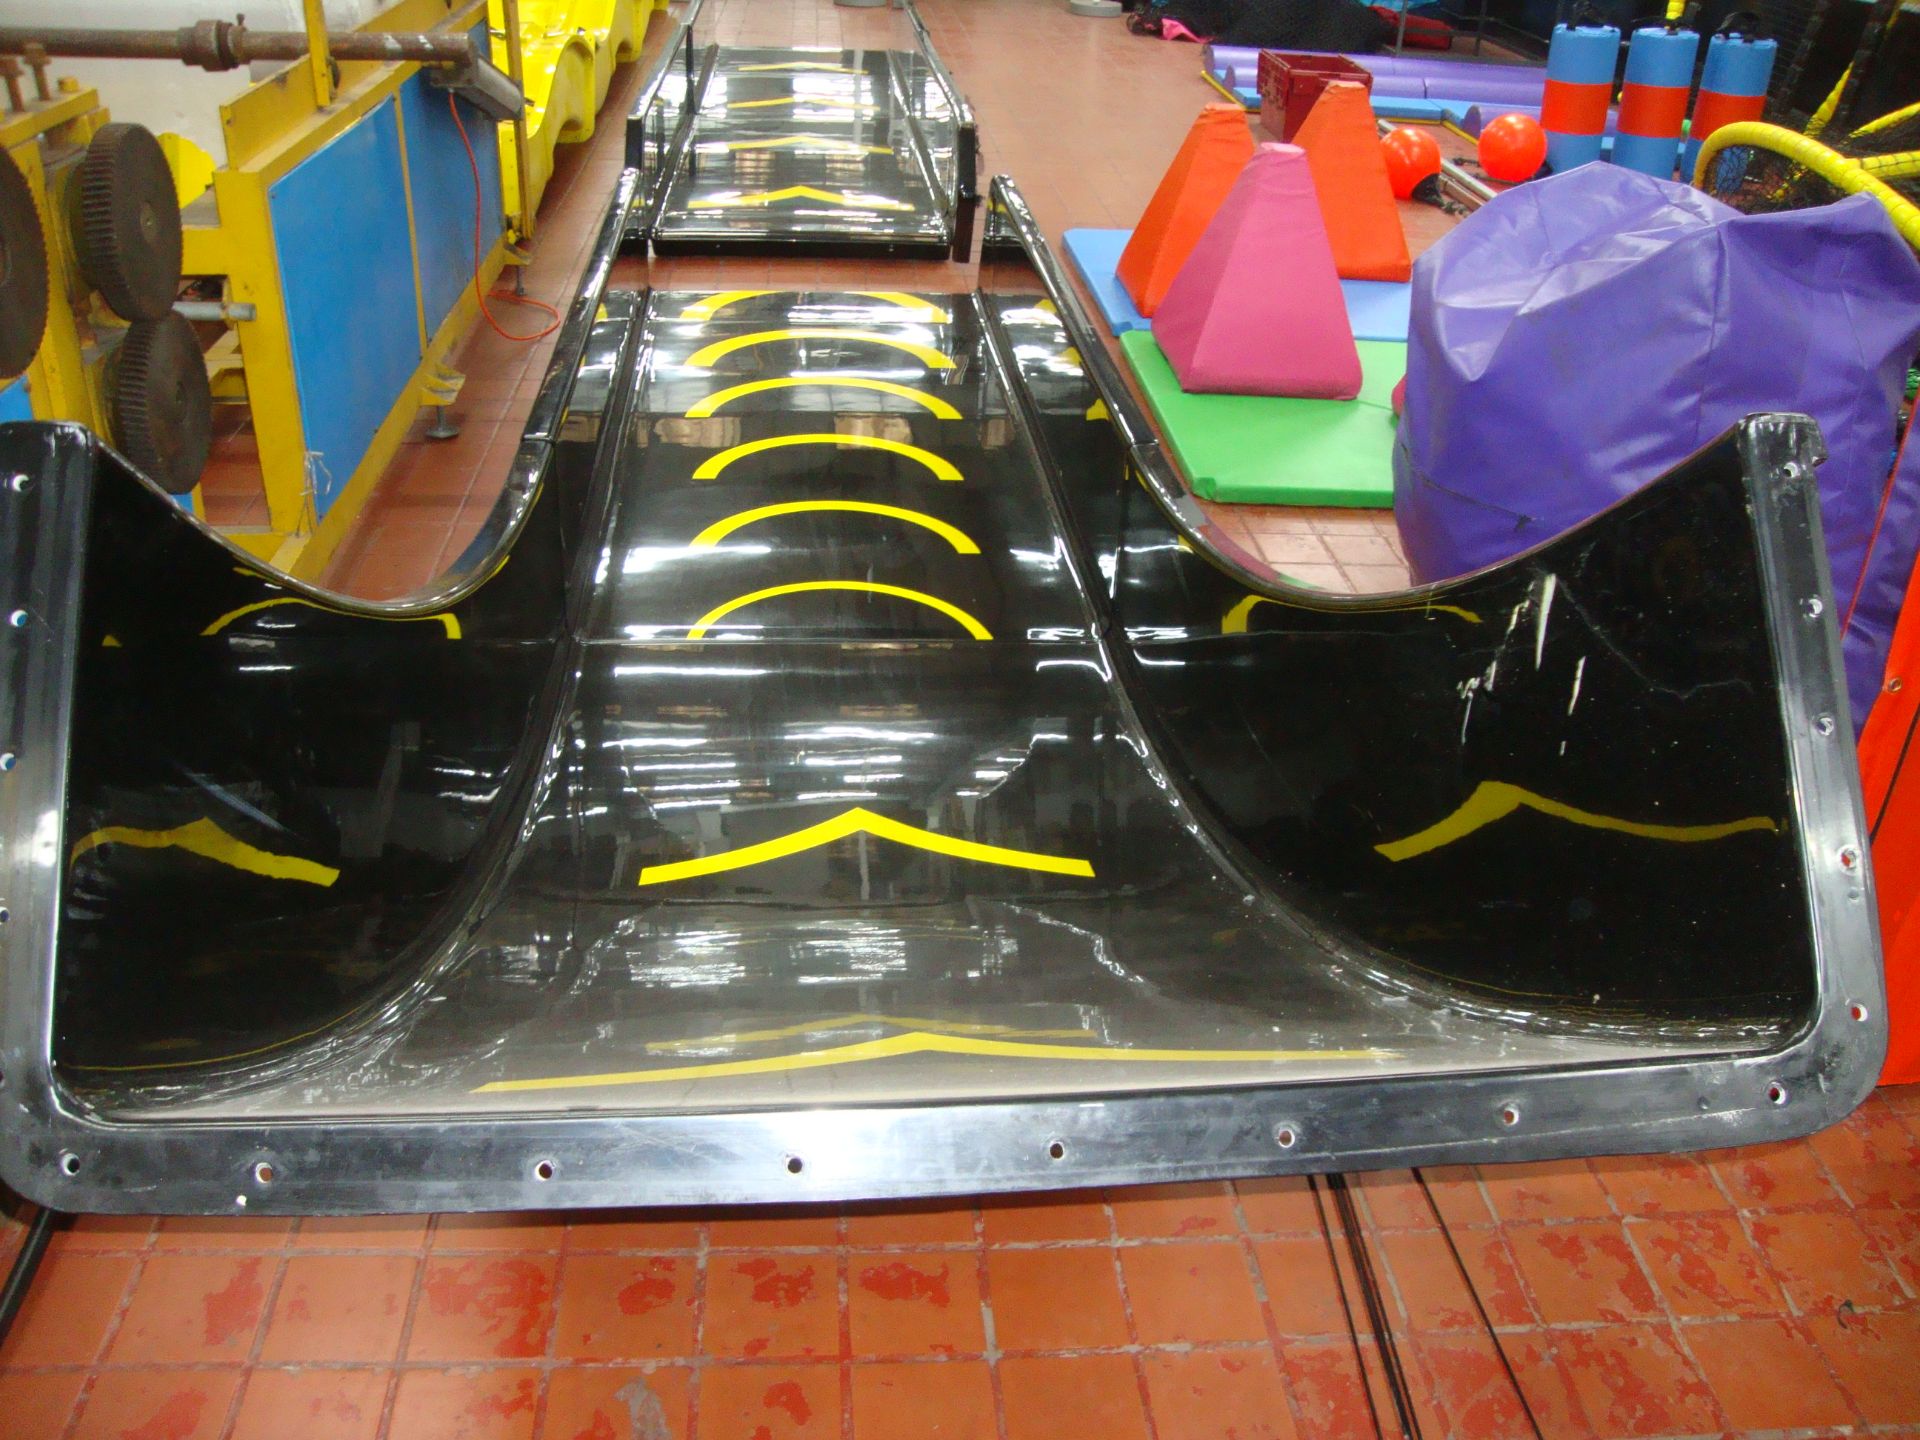 Soft Play Equipment - Image 22 of 25